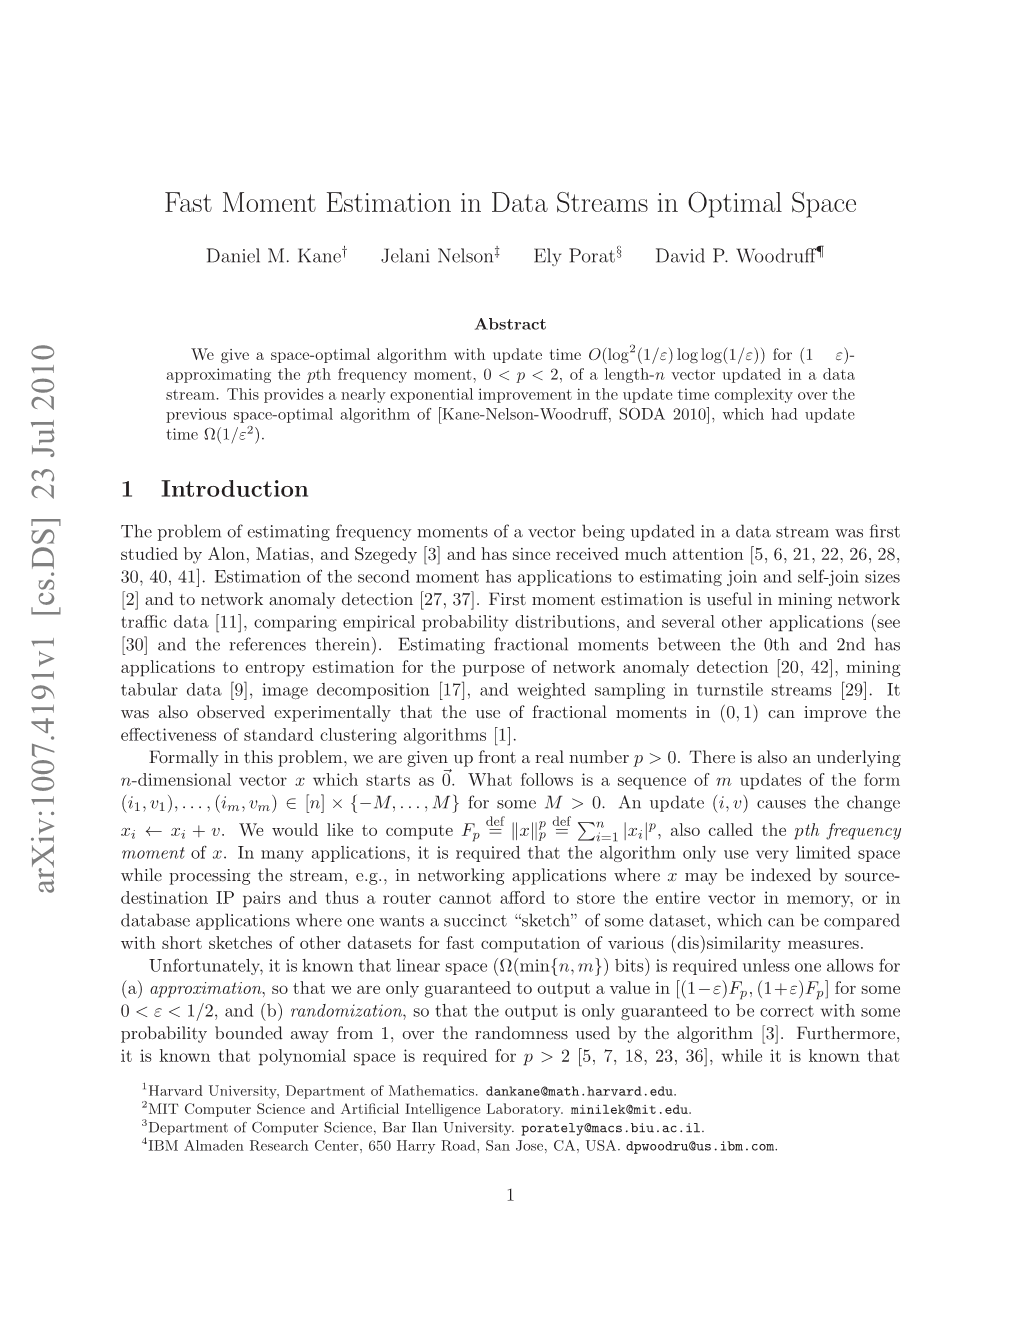 Fast Moment Estimation in Data Streams in Optimal Space